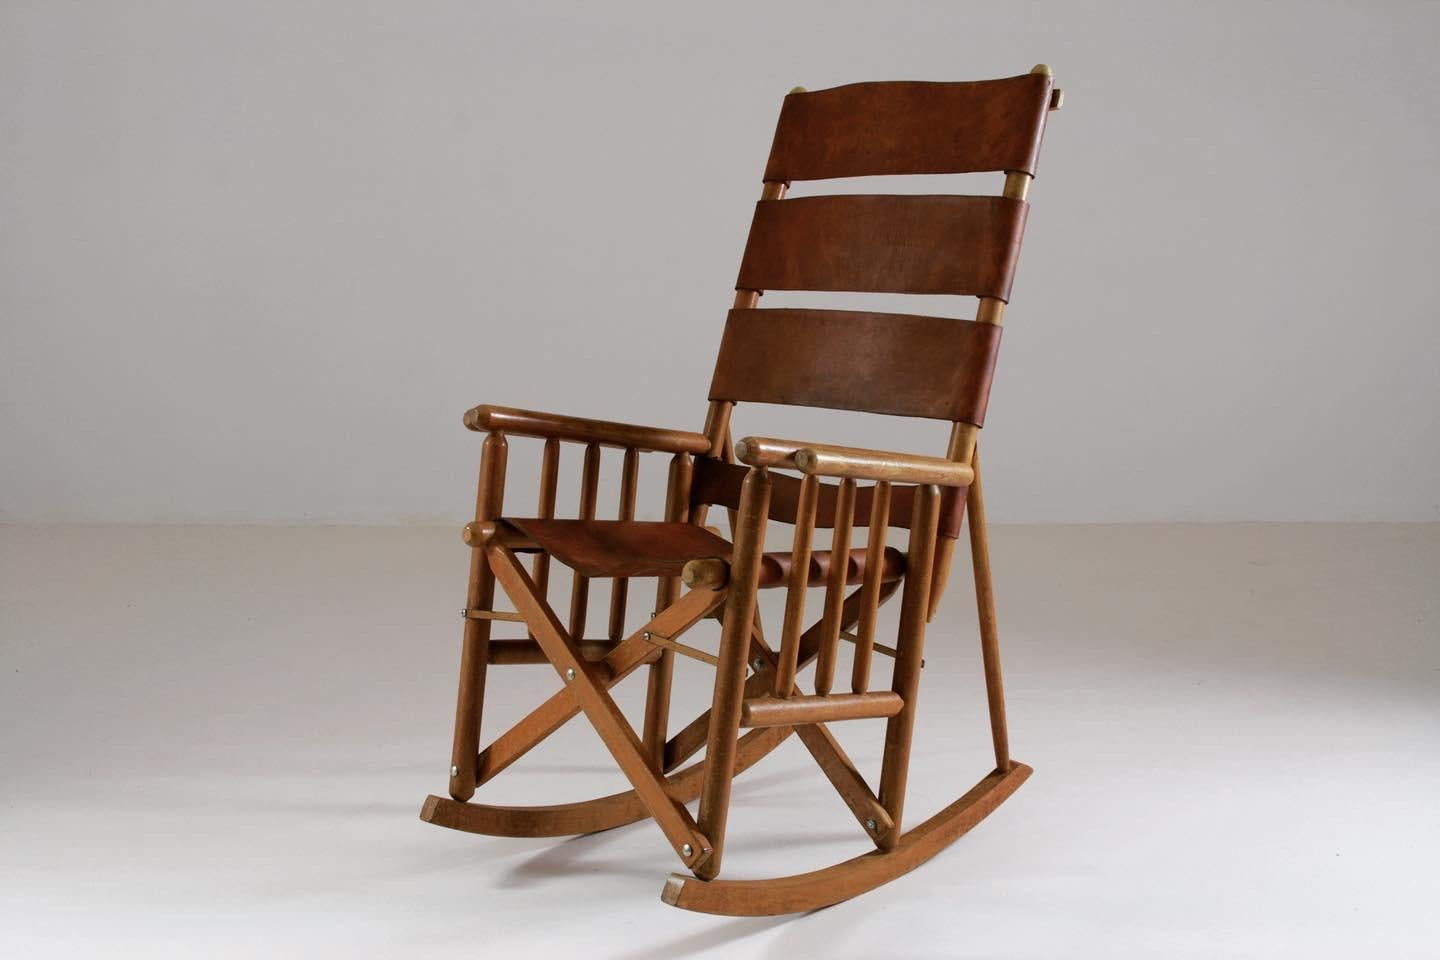 Rocking chair or foldable American rocking chair from the 1960s. Structure in wood and camel leather. Very nice patina of time.
Dimensions: W70 x D80 x H110 H. seat 50 cm